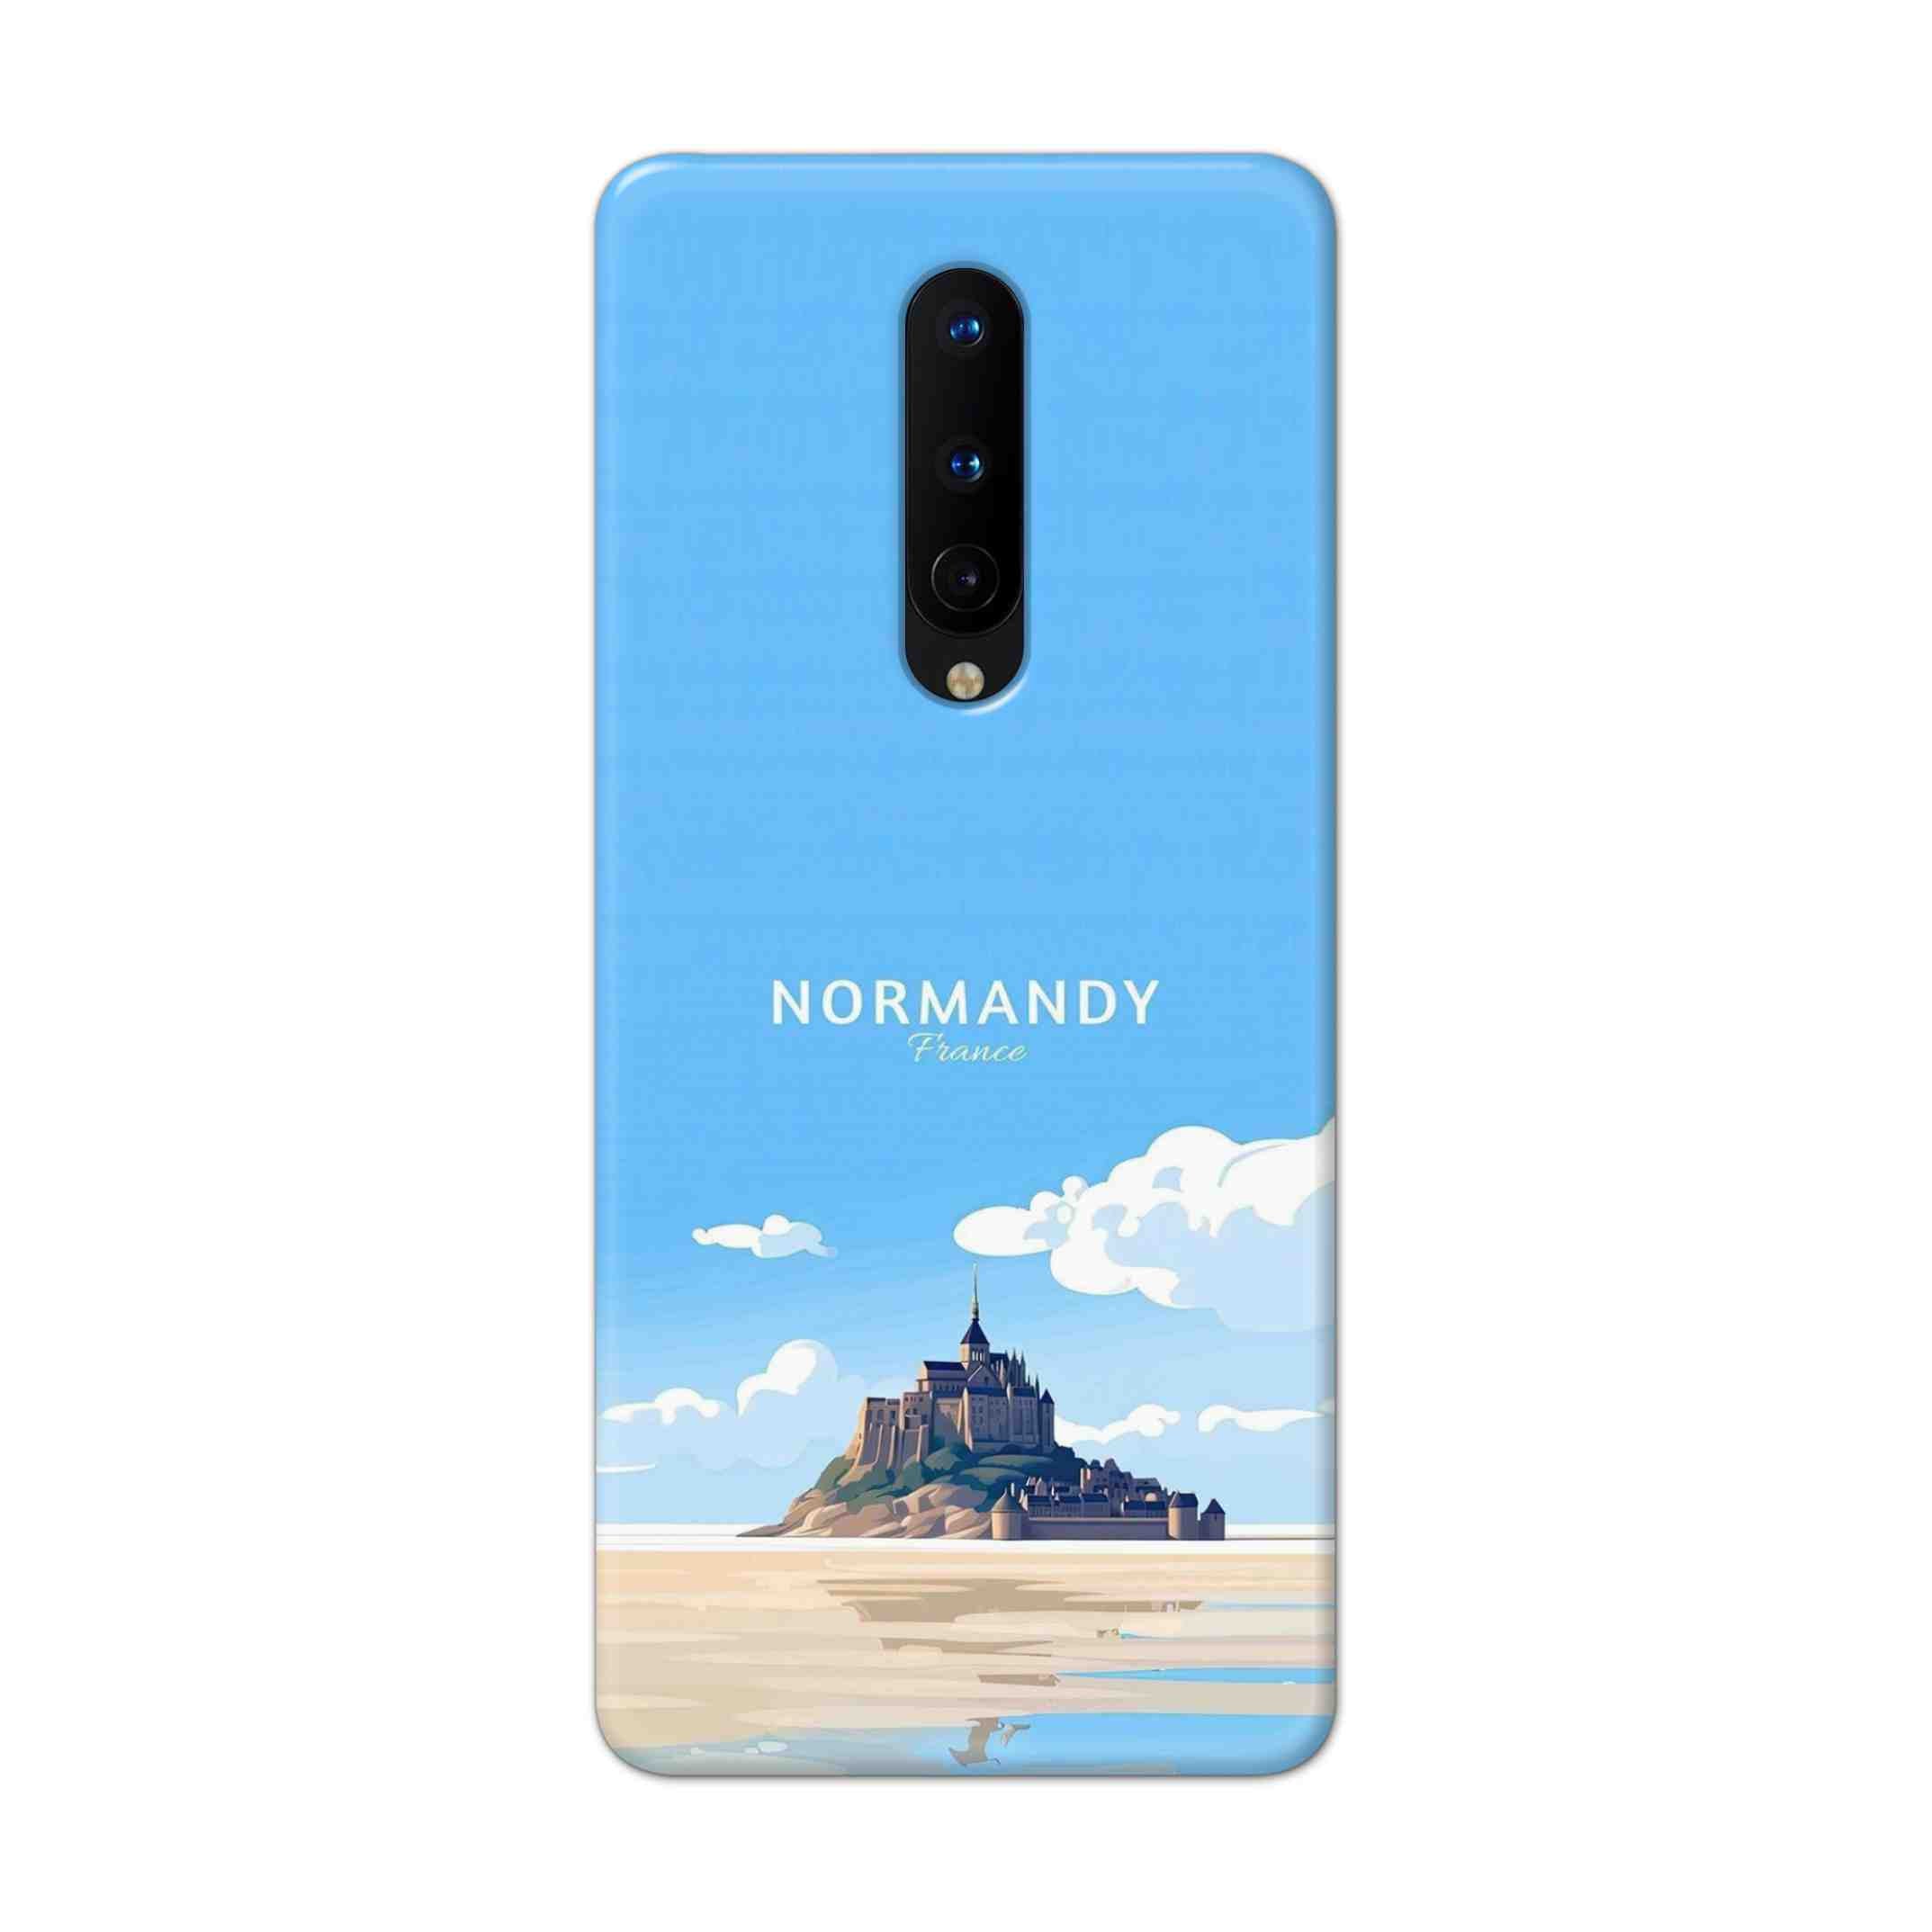 Buy Normandy Hard Back Mobile Phone Case Cover For OnePlus 8 Online